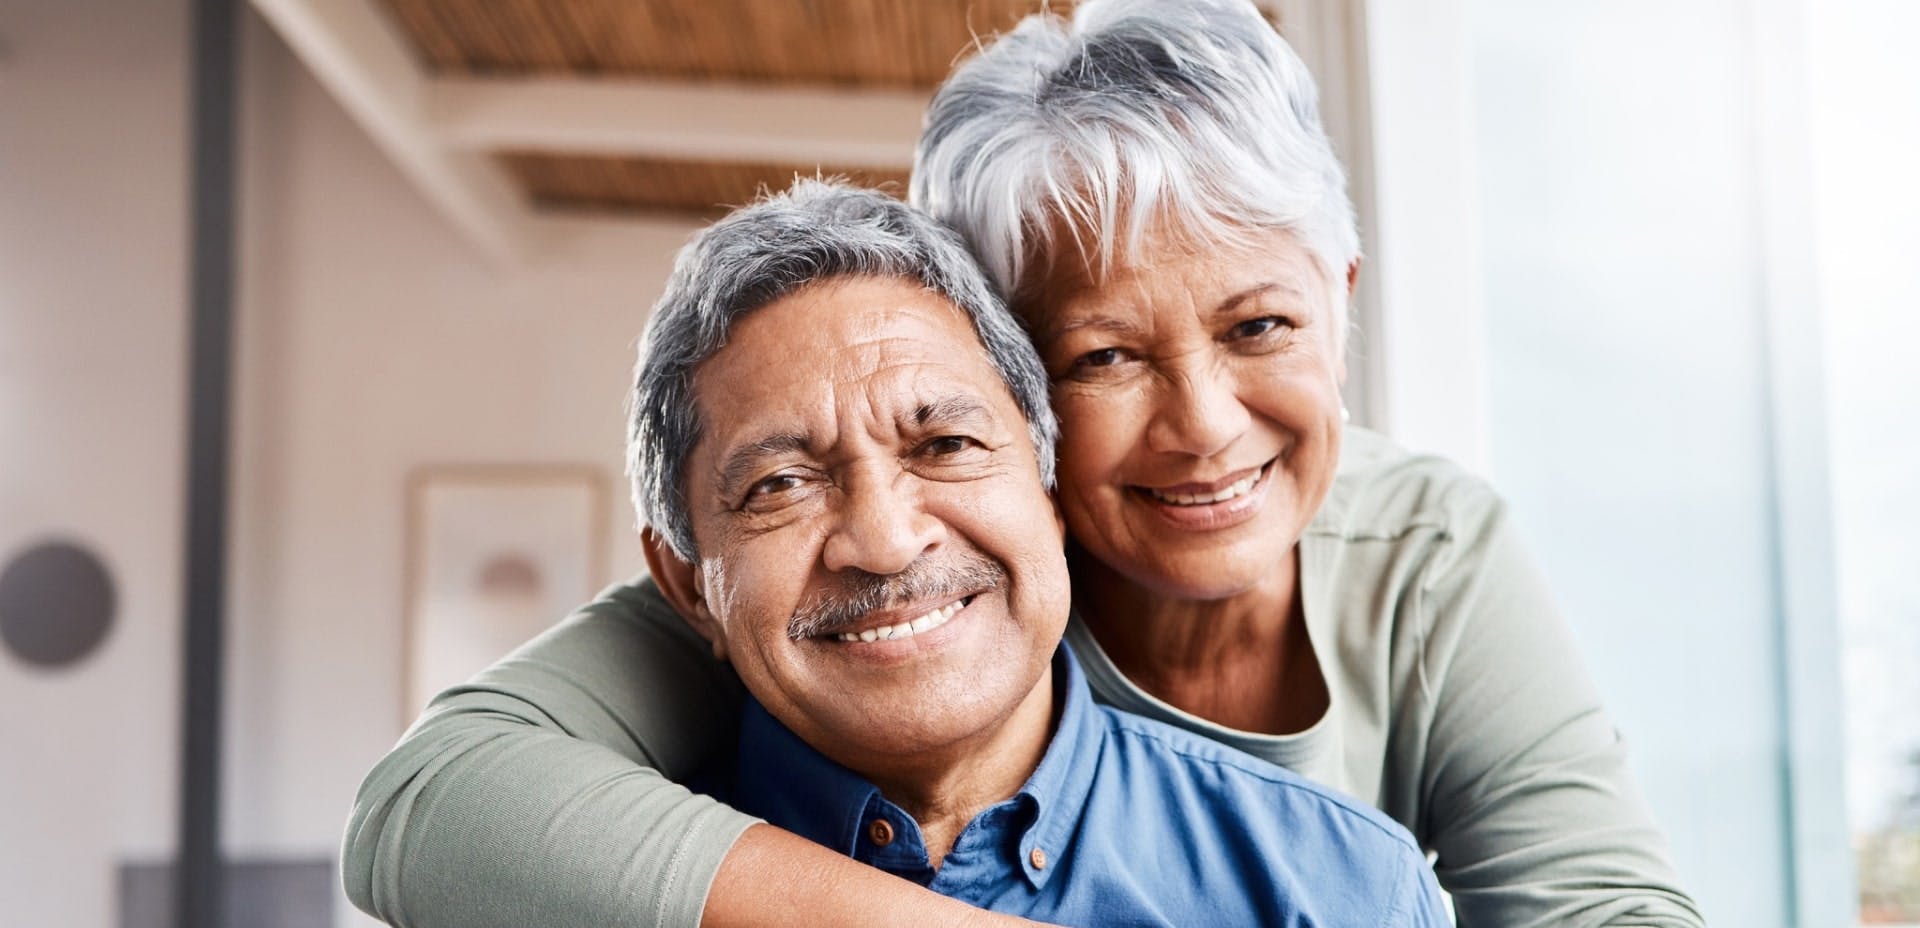 5 reasons why home care is a great option for seniors